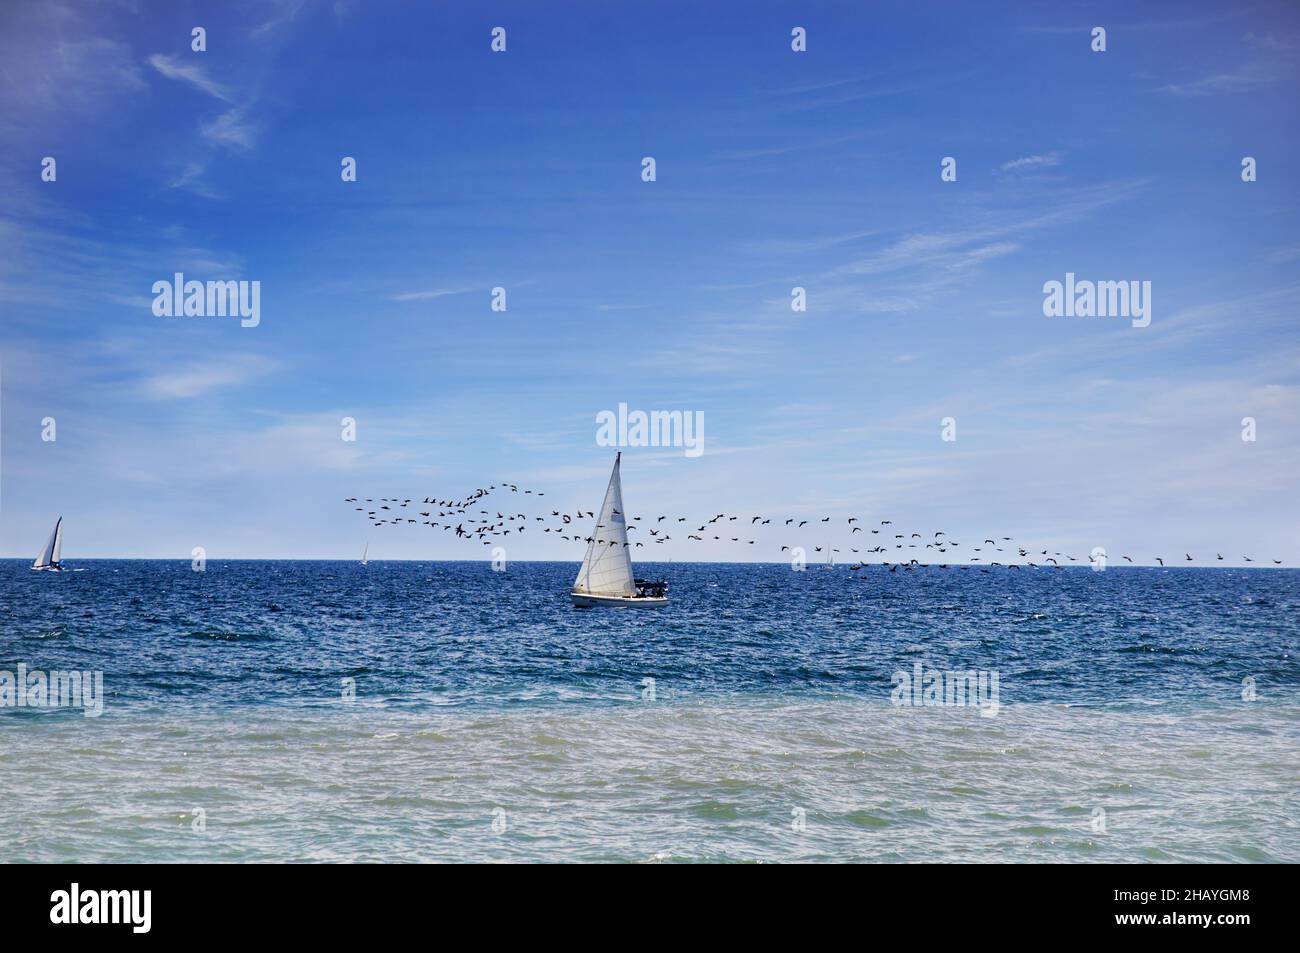 The birds and the sail - outdoor scene on the lake Ontario with light blue sky, dark blue water, and a small sailboat competing with a flock of birds. Stock Photo